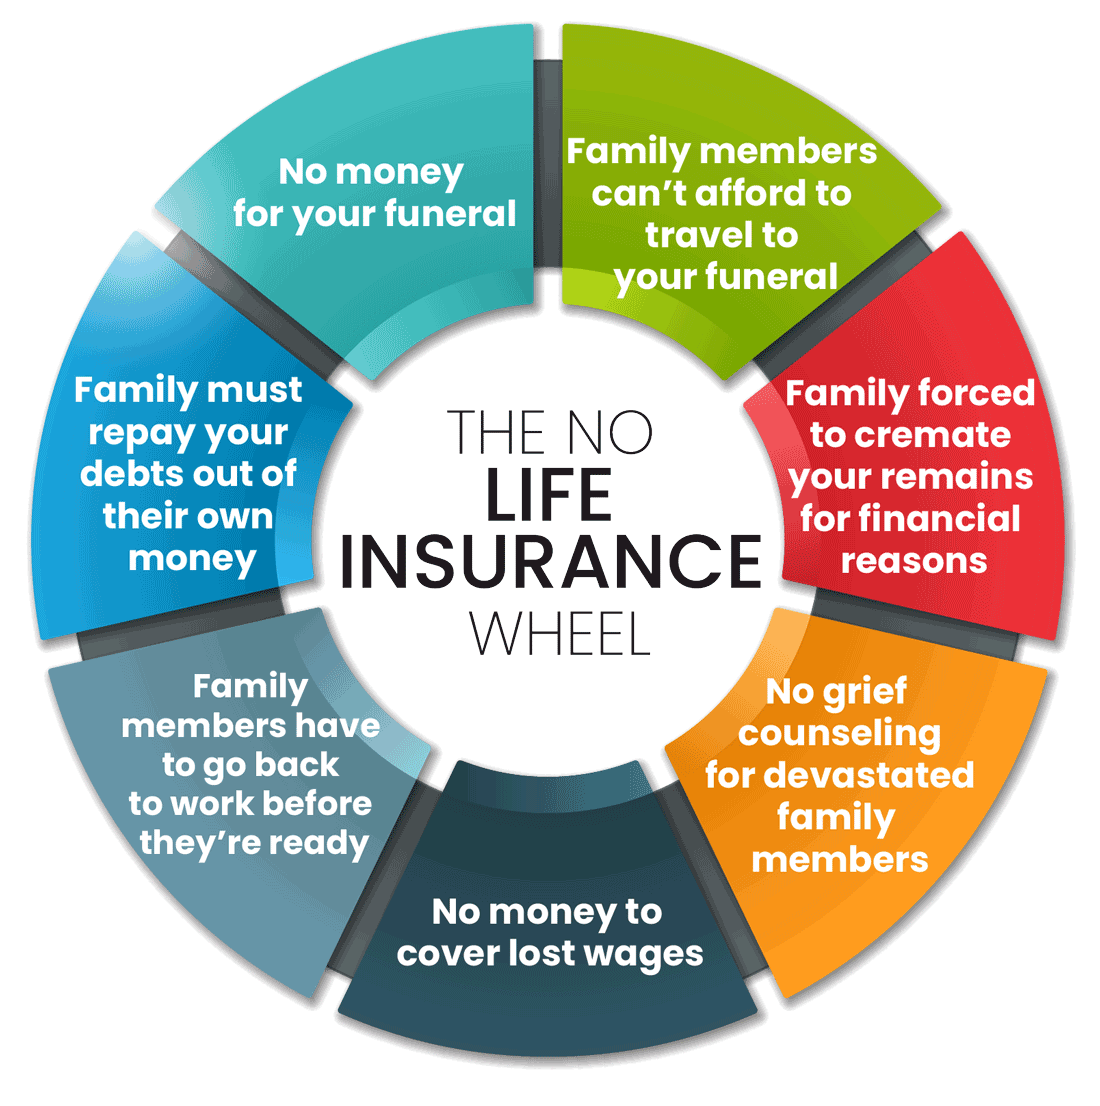 Wheel describing what happens if you don't have life insurance.